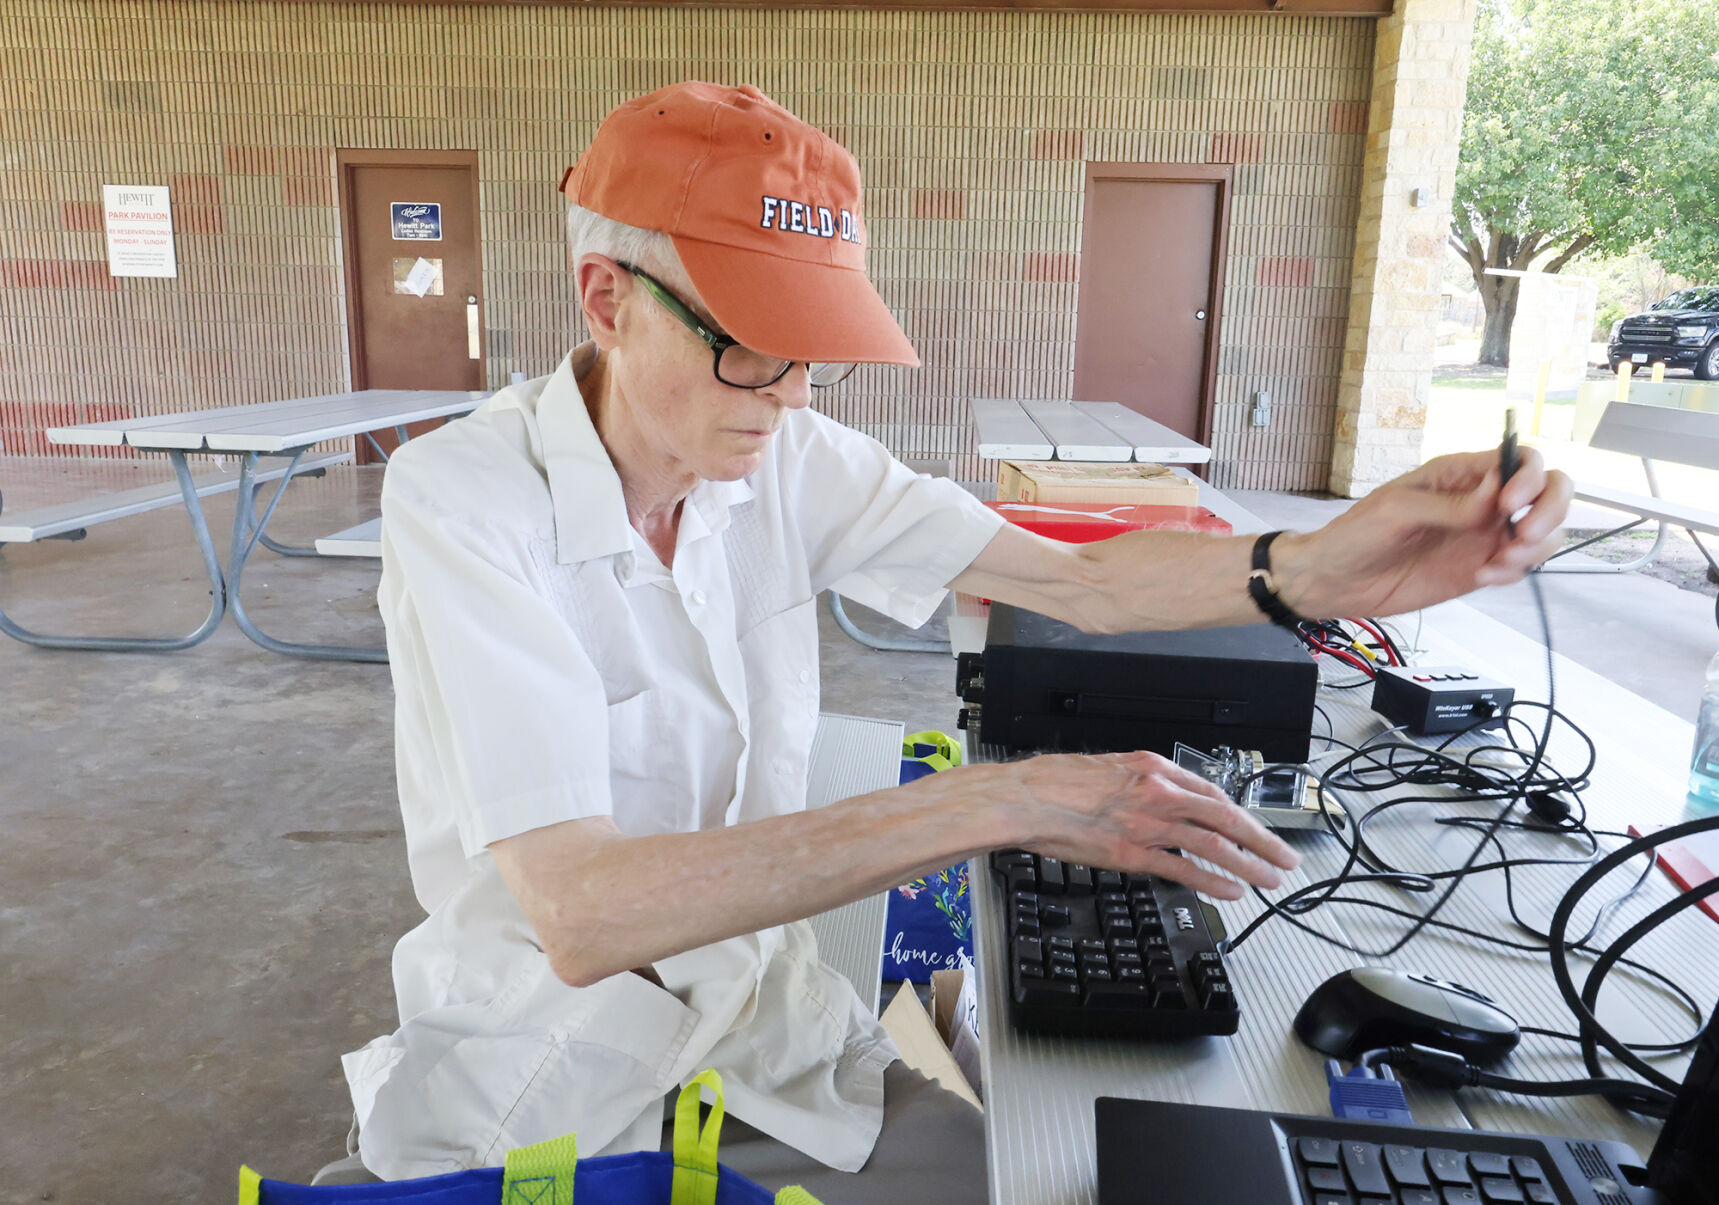 Field Day brings ham radio operators to Hewitt Park for nationwide event pic